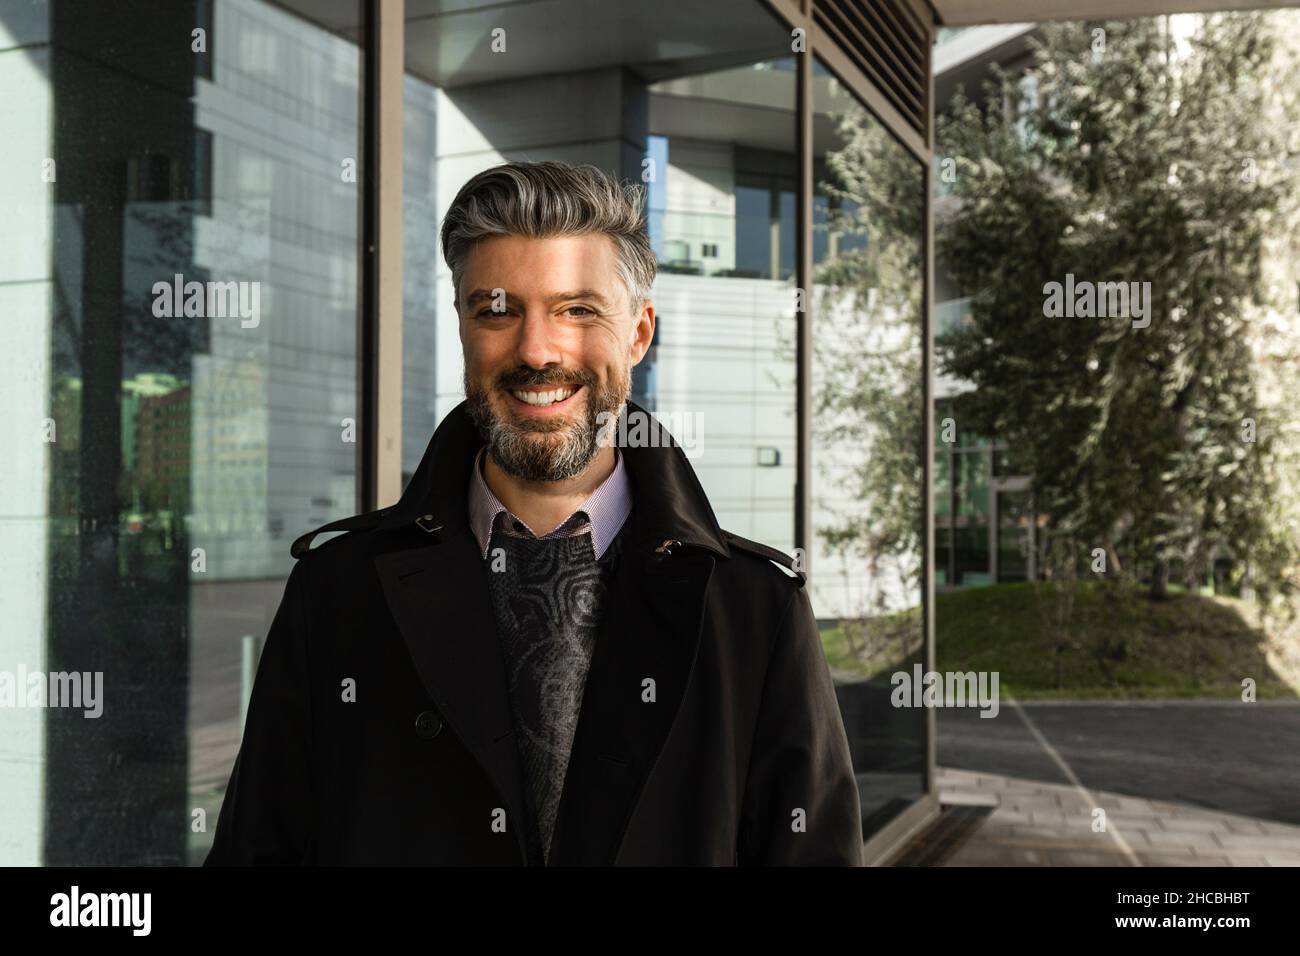 Businessman raising eyebrow in front of building Stock Photo